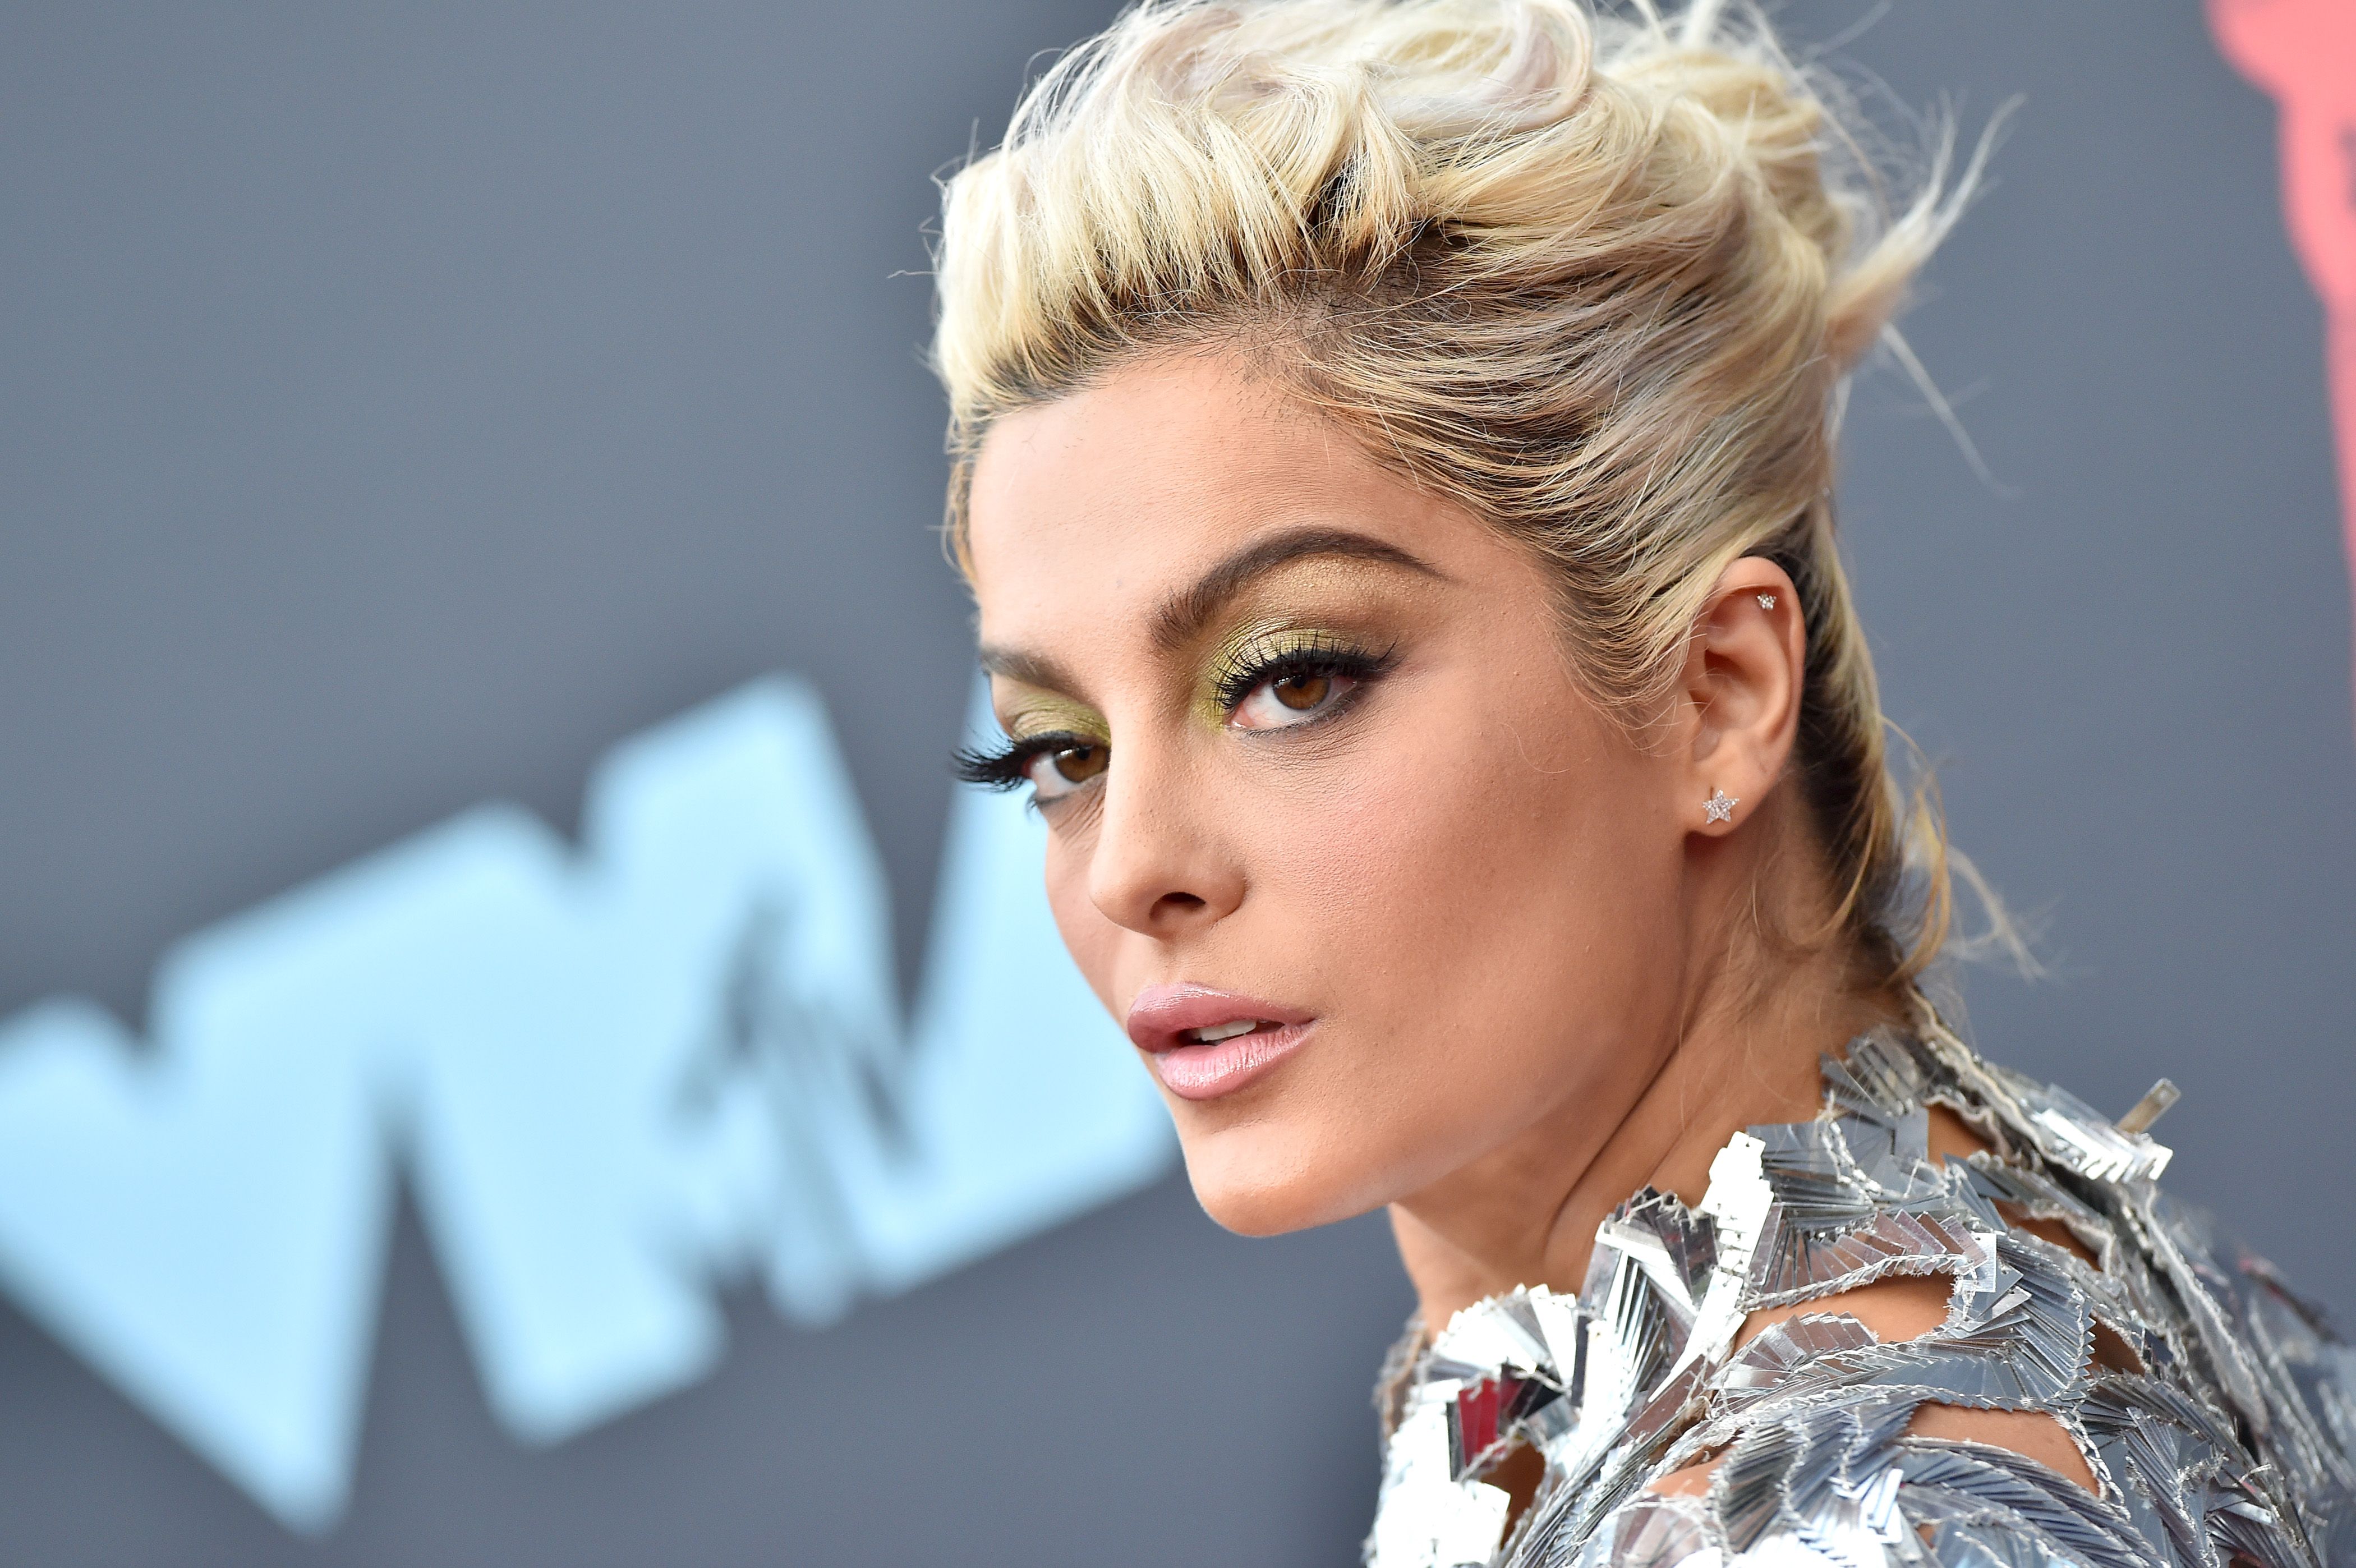 Bebe Rexha: 'I Would Starve Myself Before Filming a Music Video'